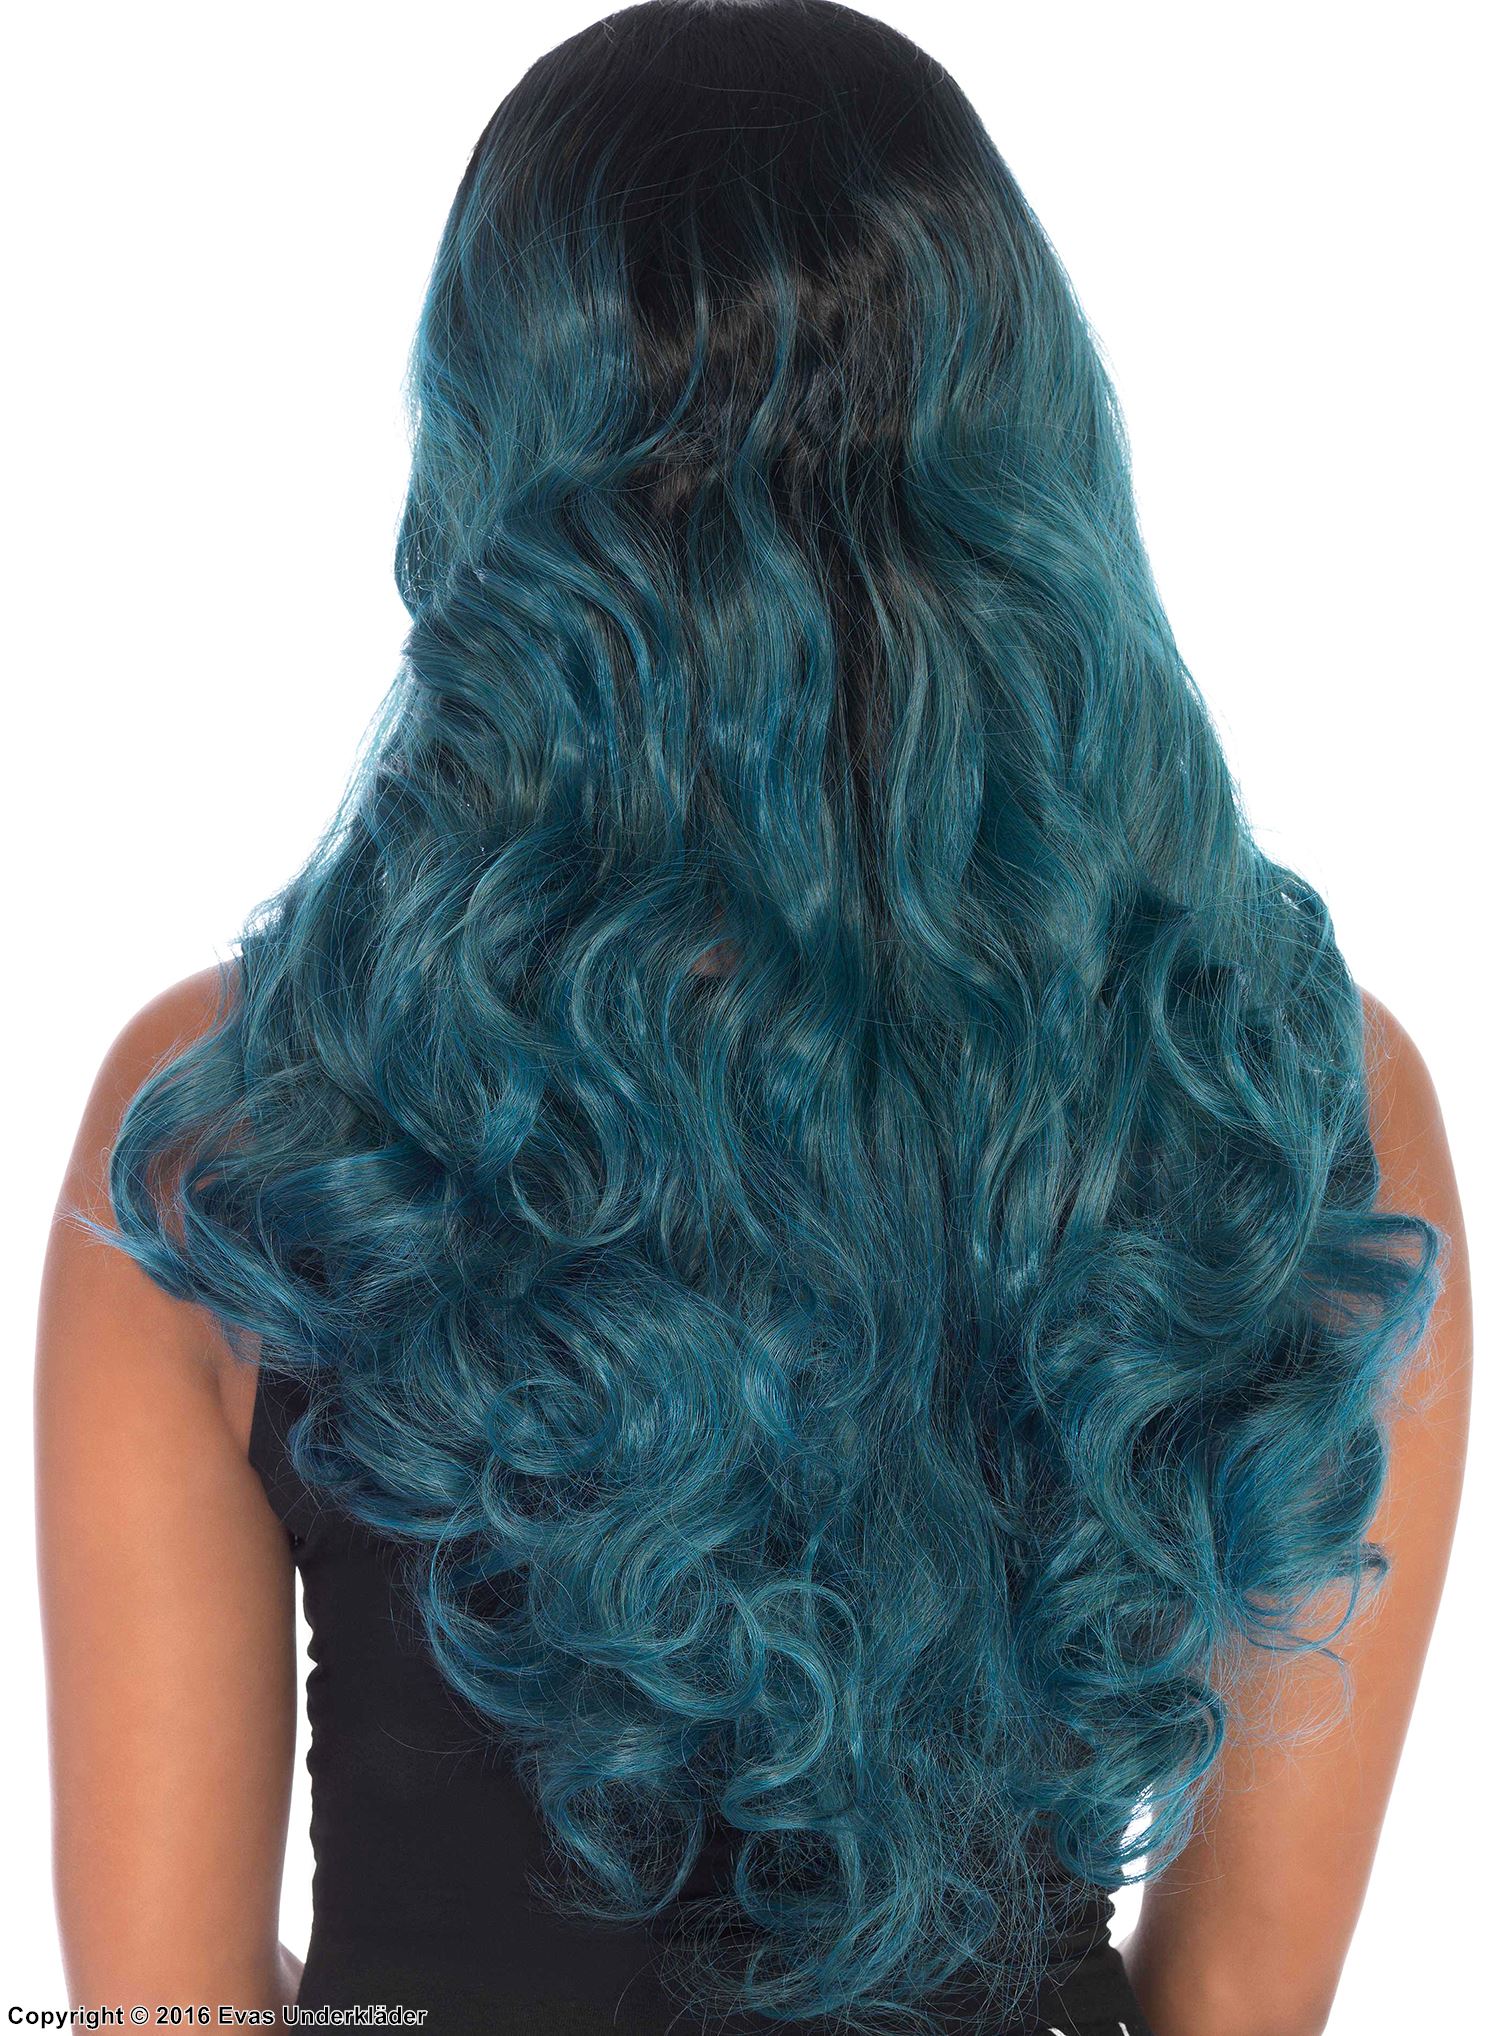 Long wig, waves, center part, two tone color